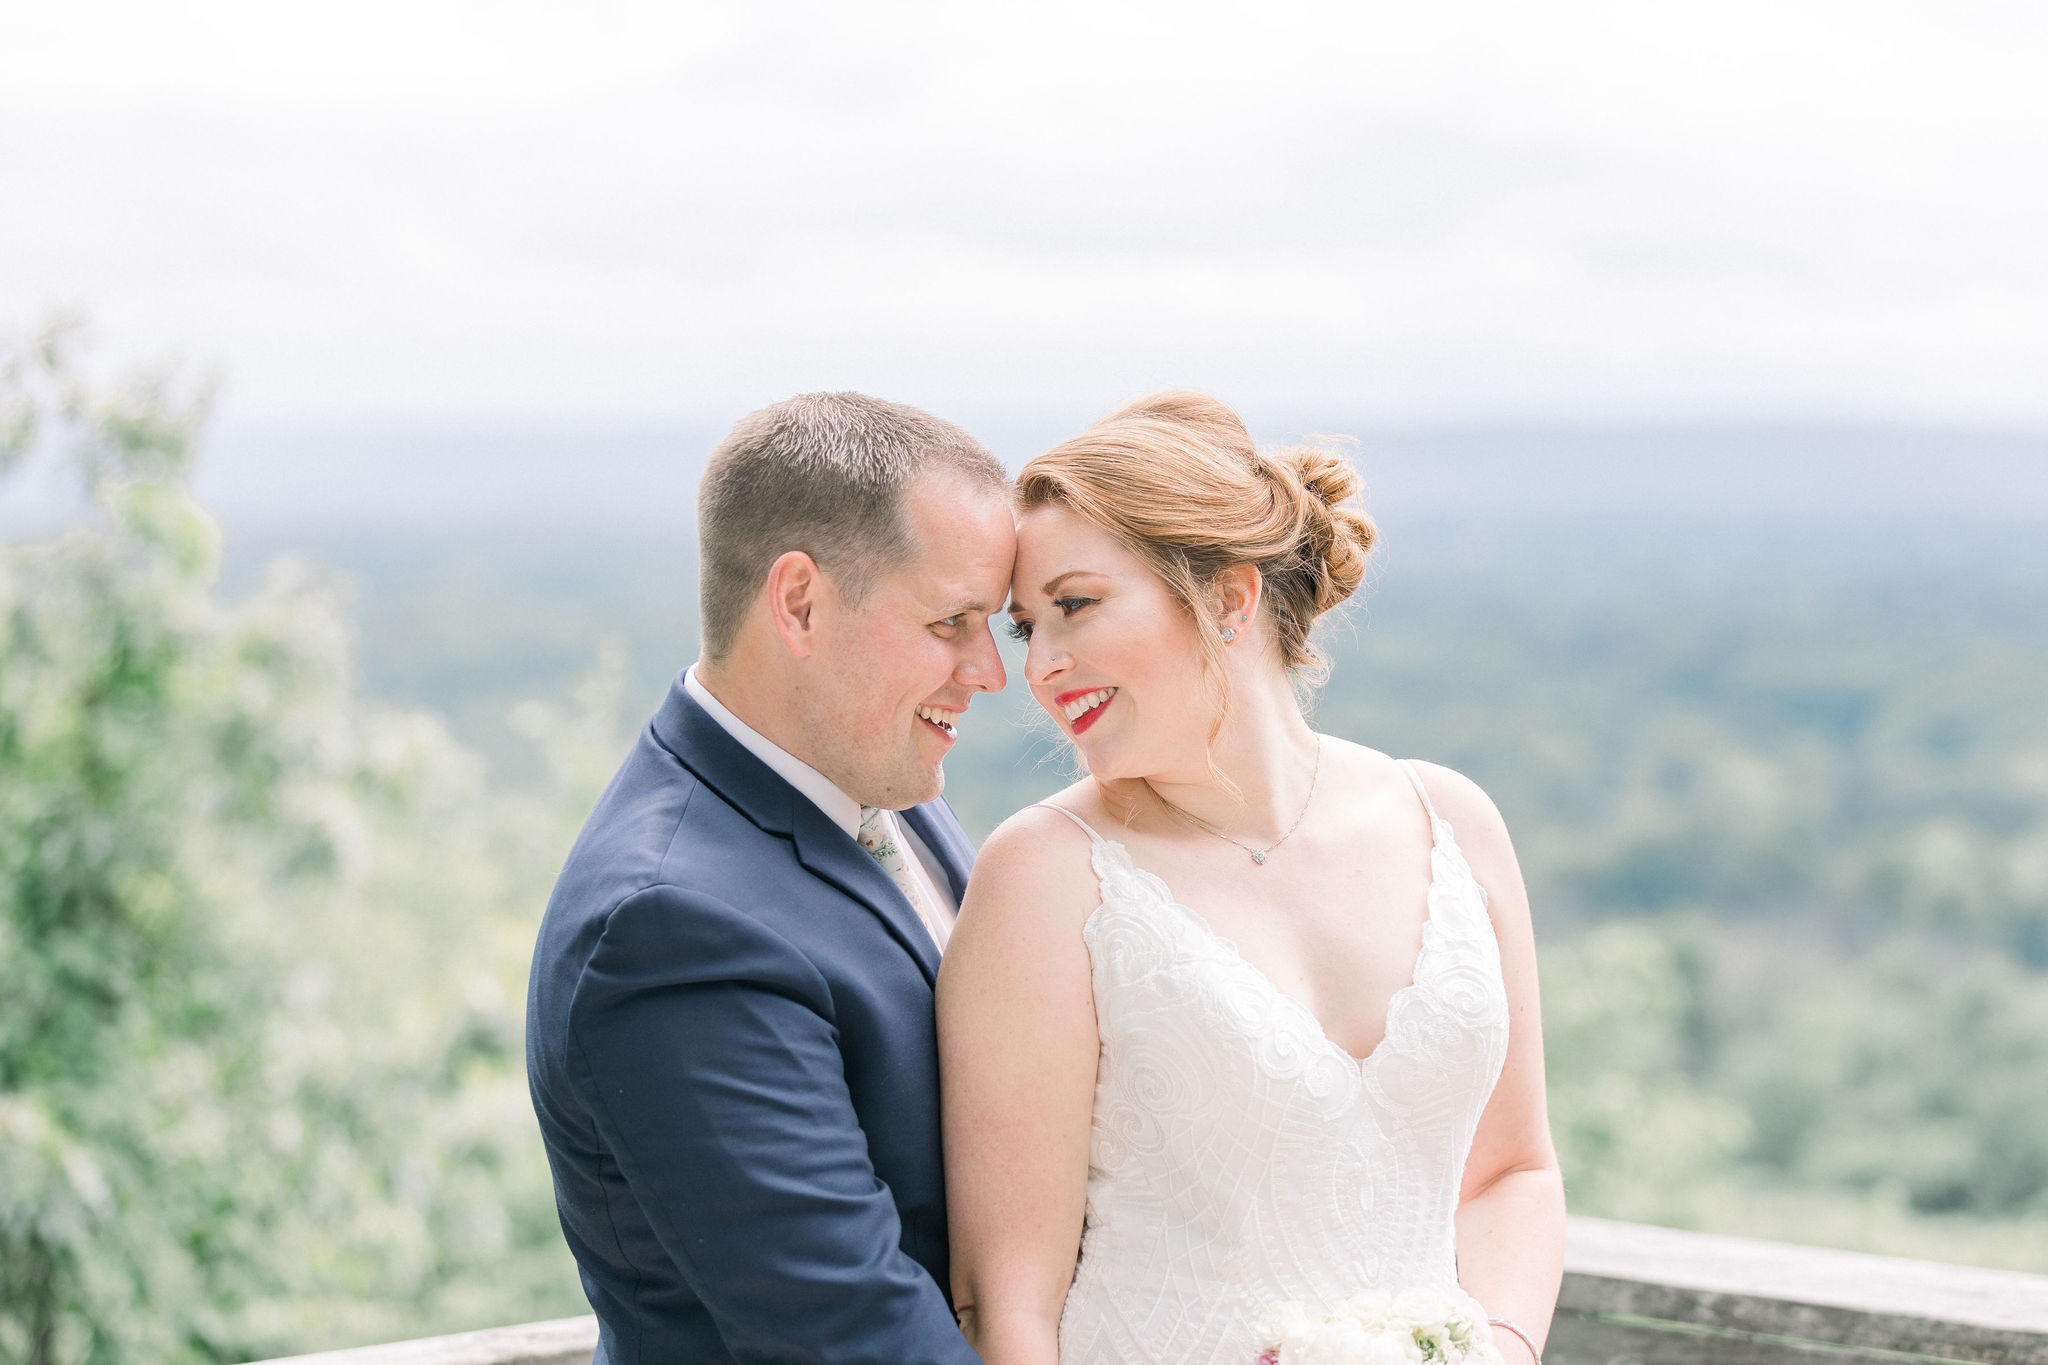 husband + Wife share intimate moment together during Rogers Orchard Wedding captured by Stephanie Berenson Photography